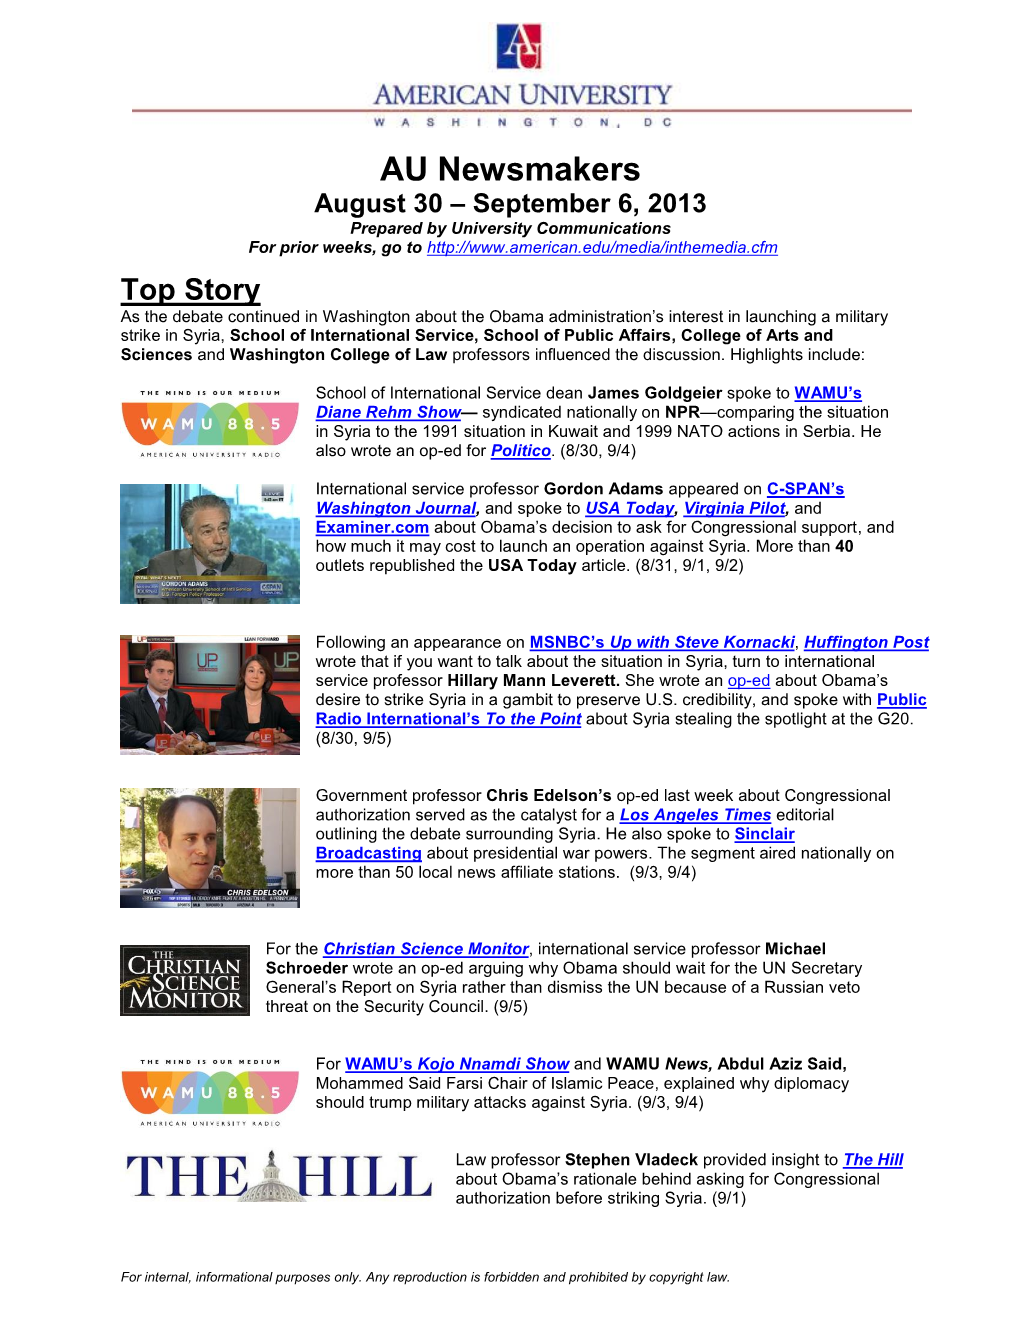 AU Newsmakers August 30 – September 6, 2013 Prepared by University Communications for Prior Weeks, Go To